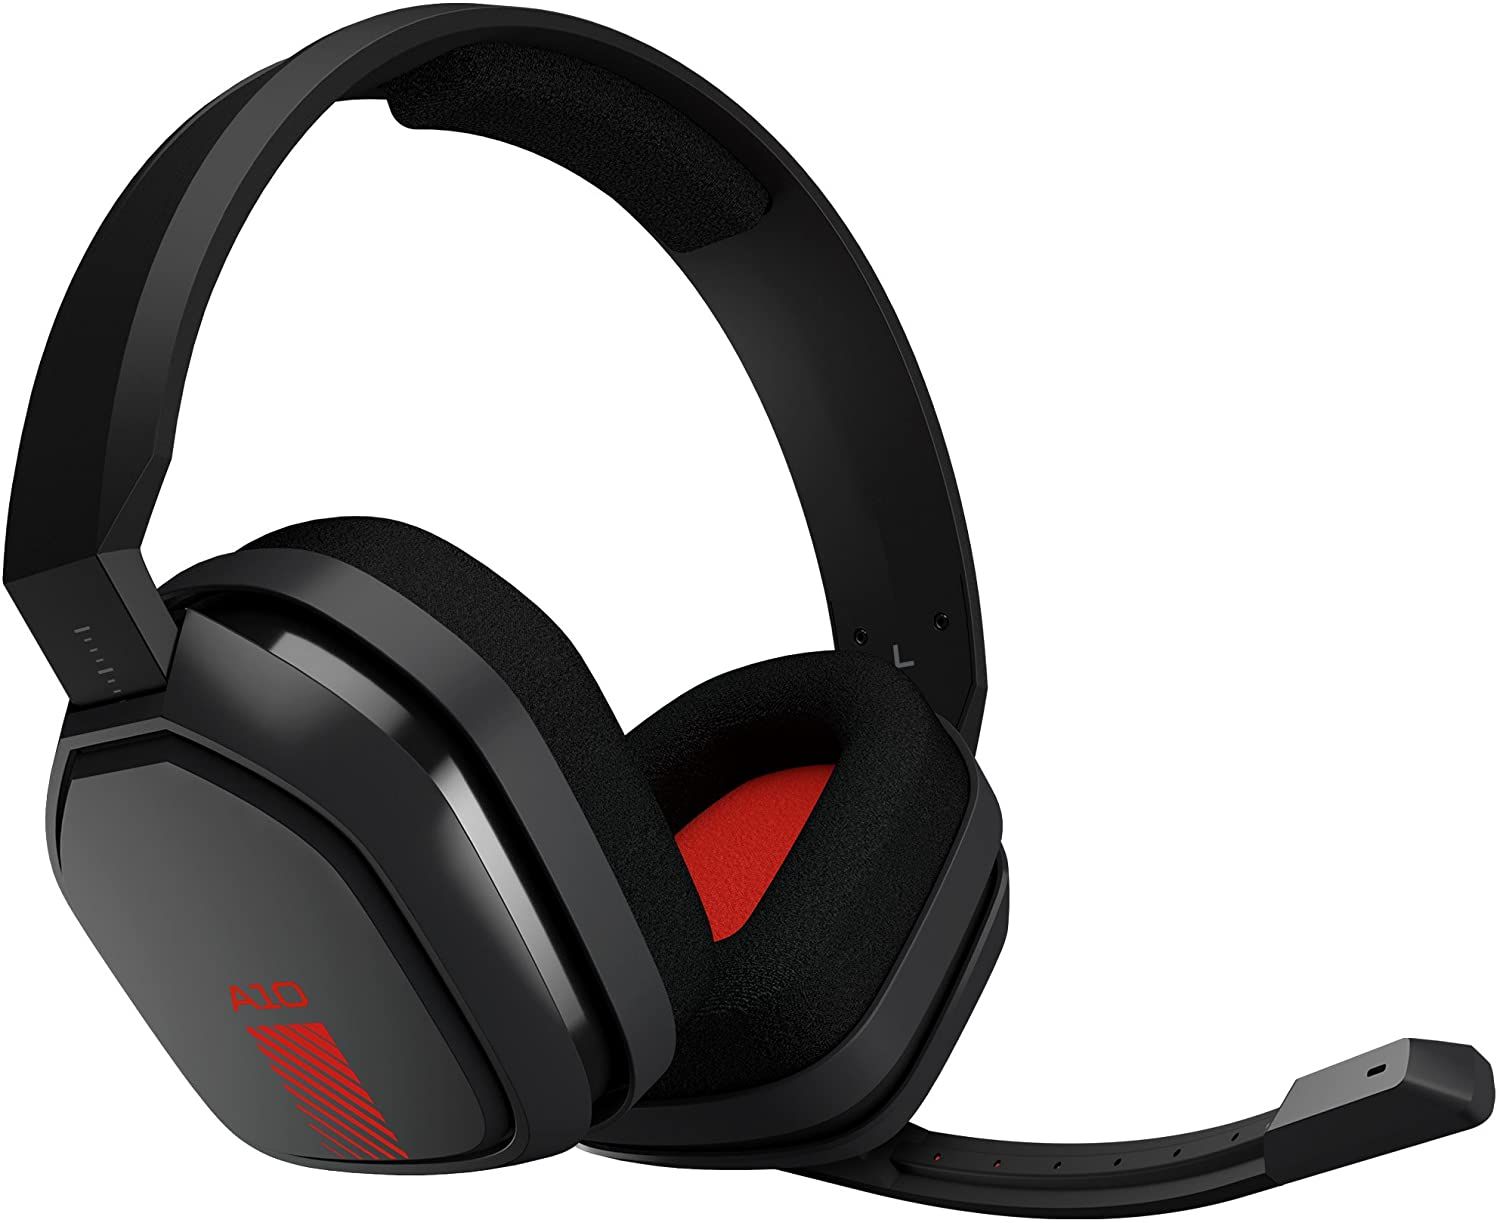 The 7 Best Budget Gaming Headsets